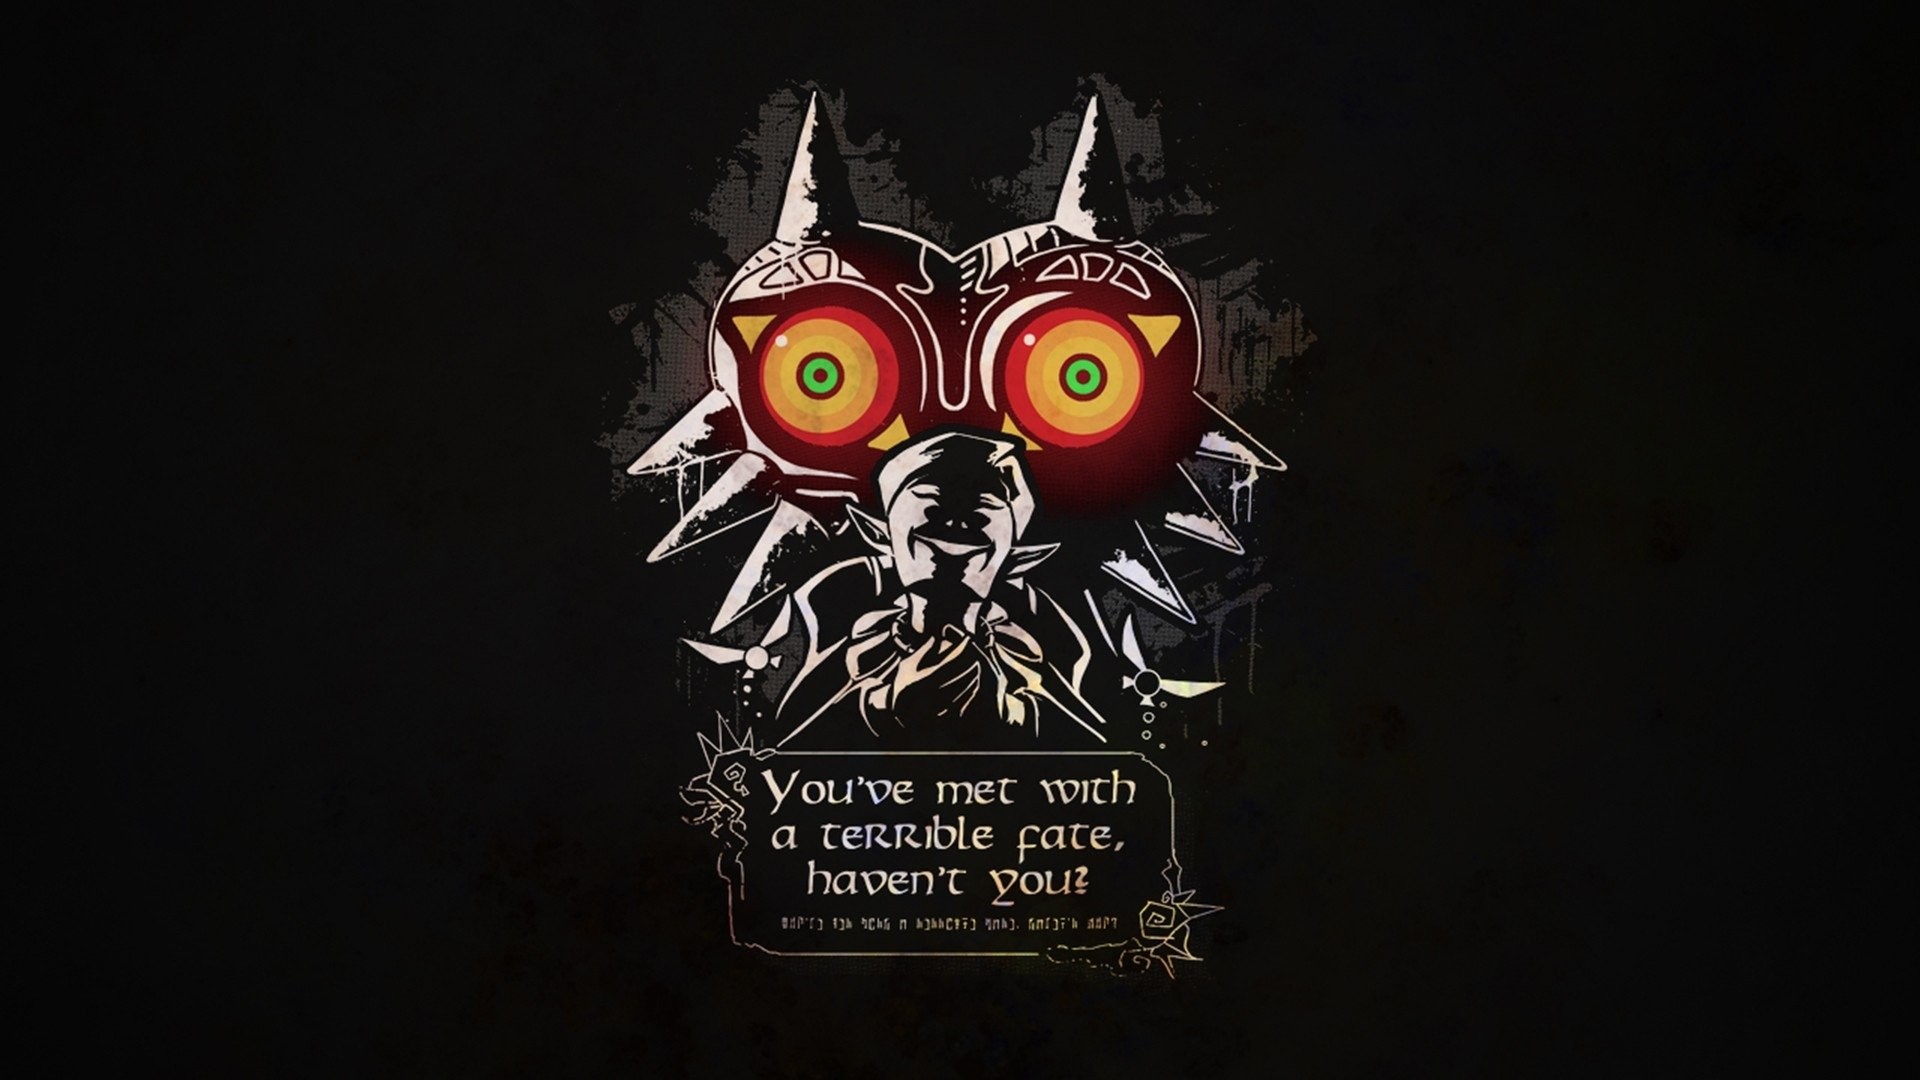 majora's mask backgrounds - Dult You've met with a terrible fate, haven't you? Shpt 1 Chan anti nh. aniil 1.17